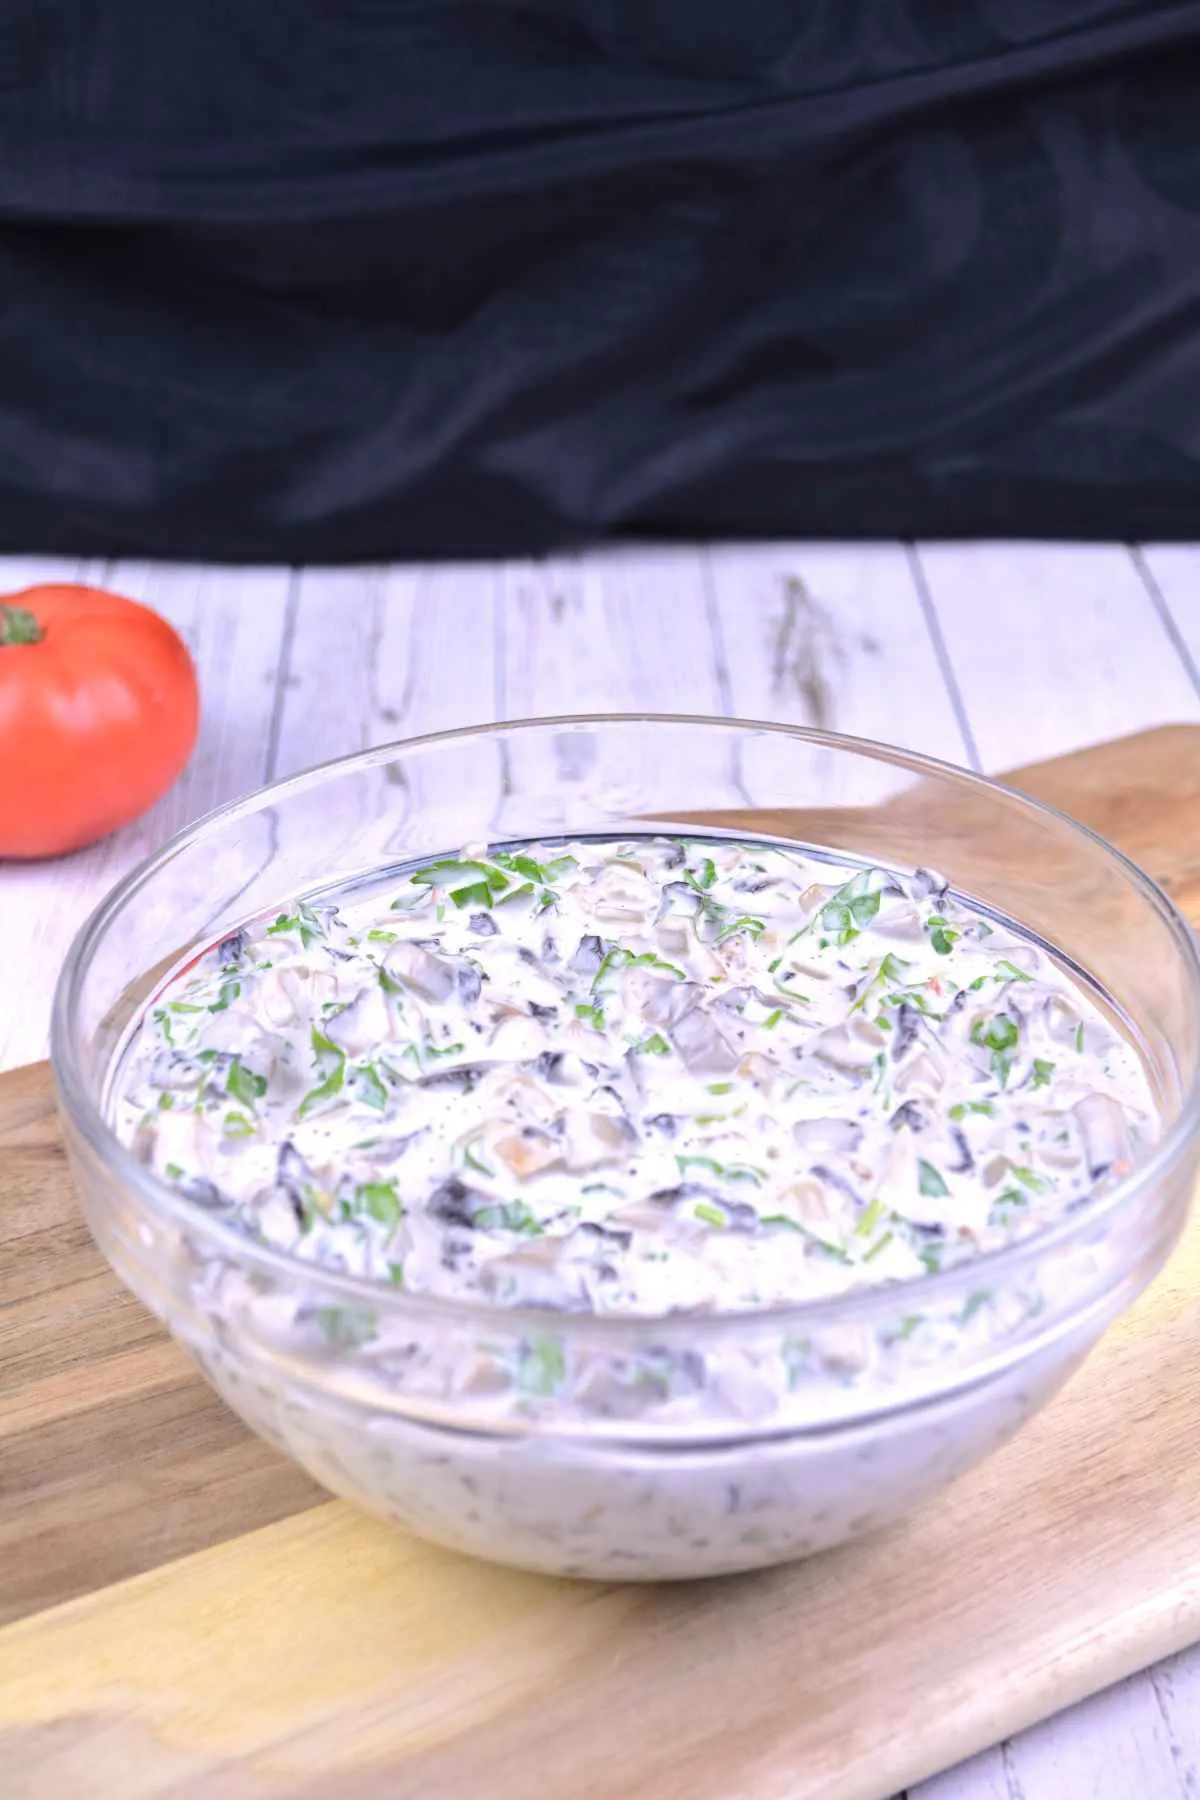 Mushroom Salad With Mayonnaise-Served in a Glass Bowl With One Tomato